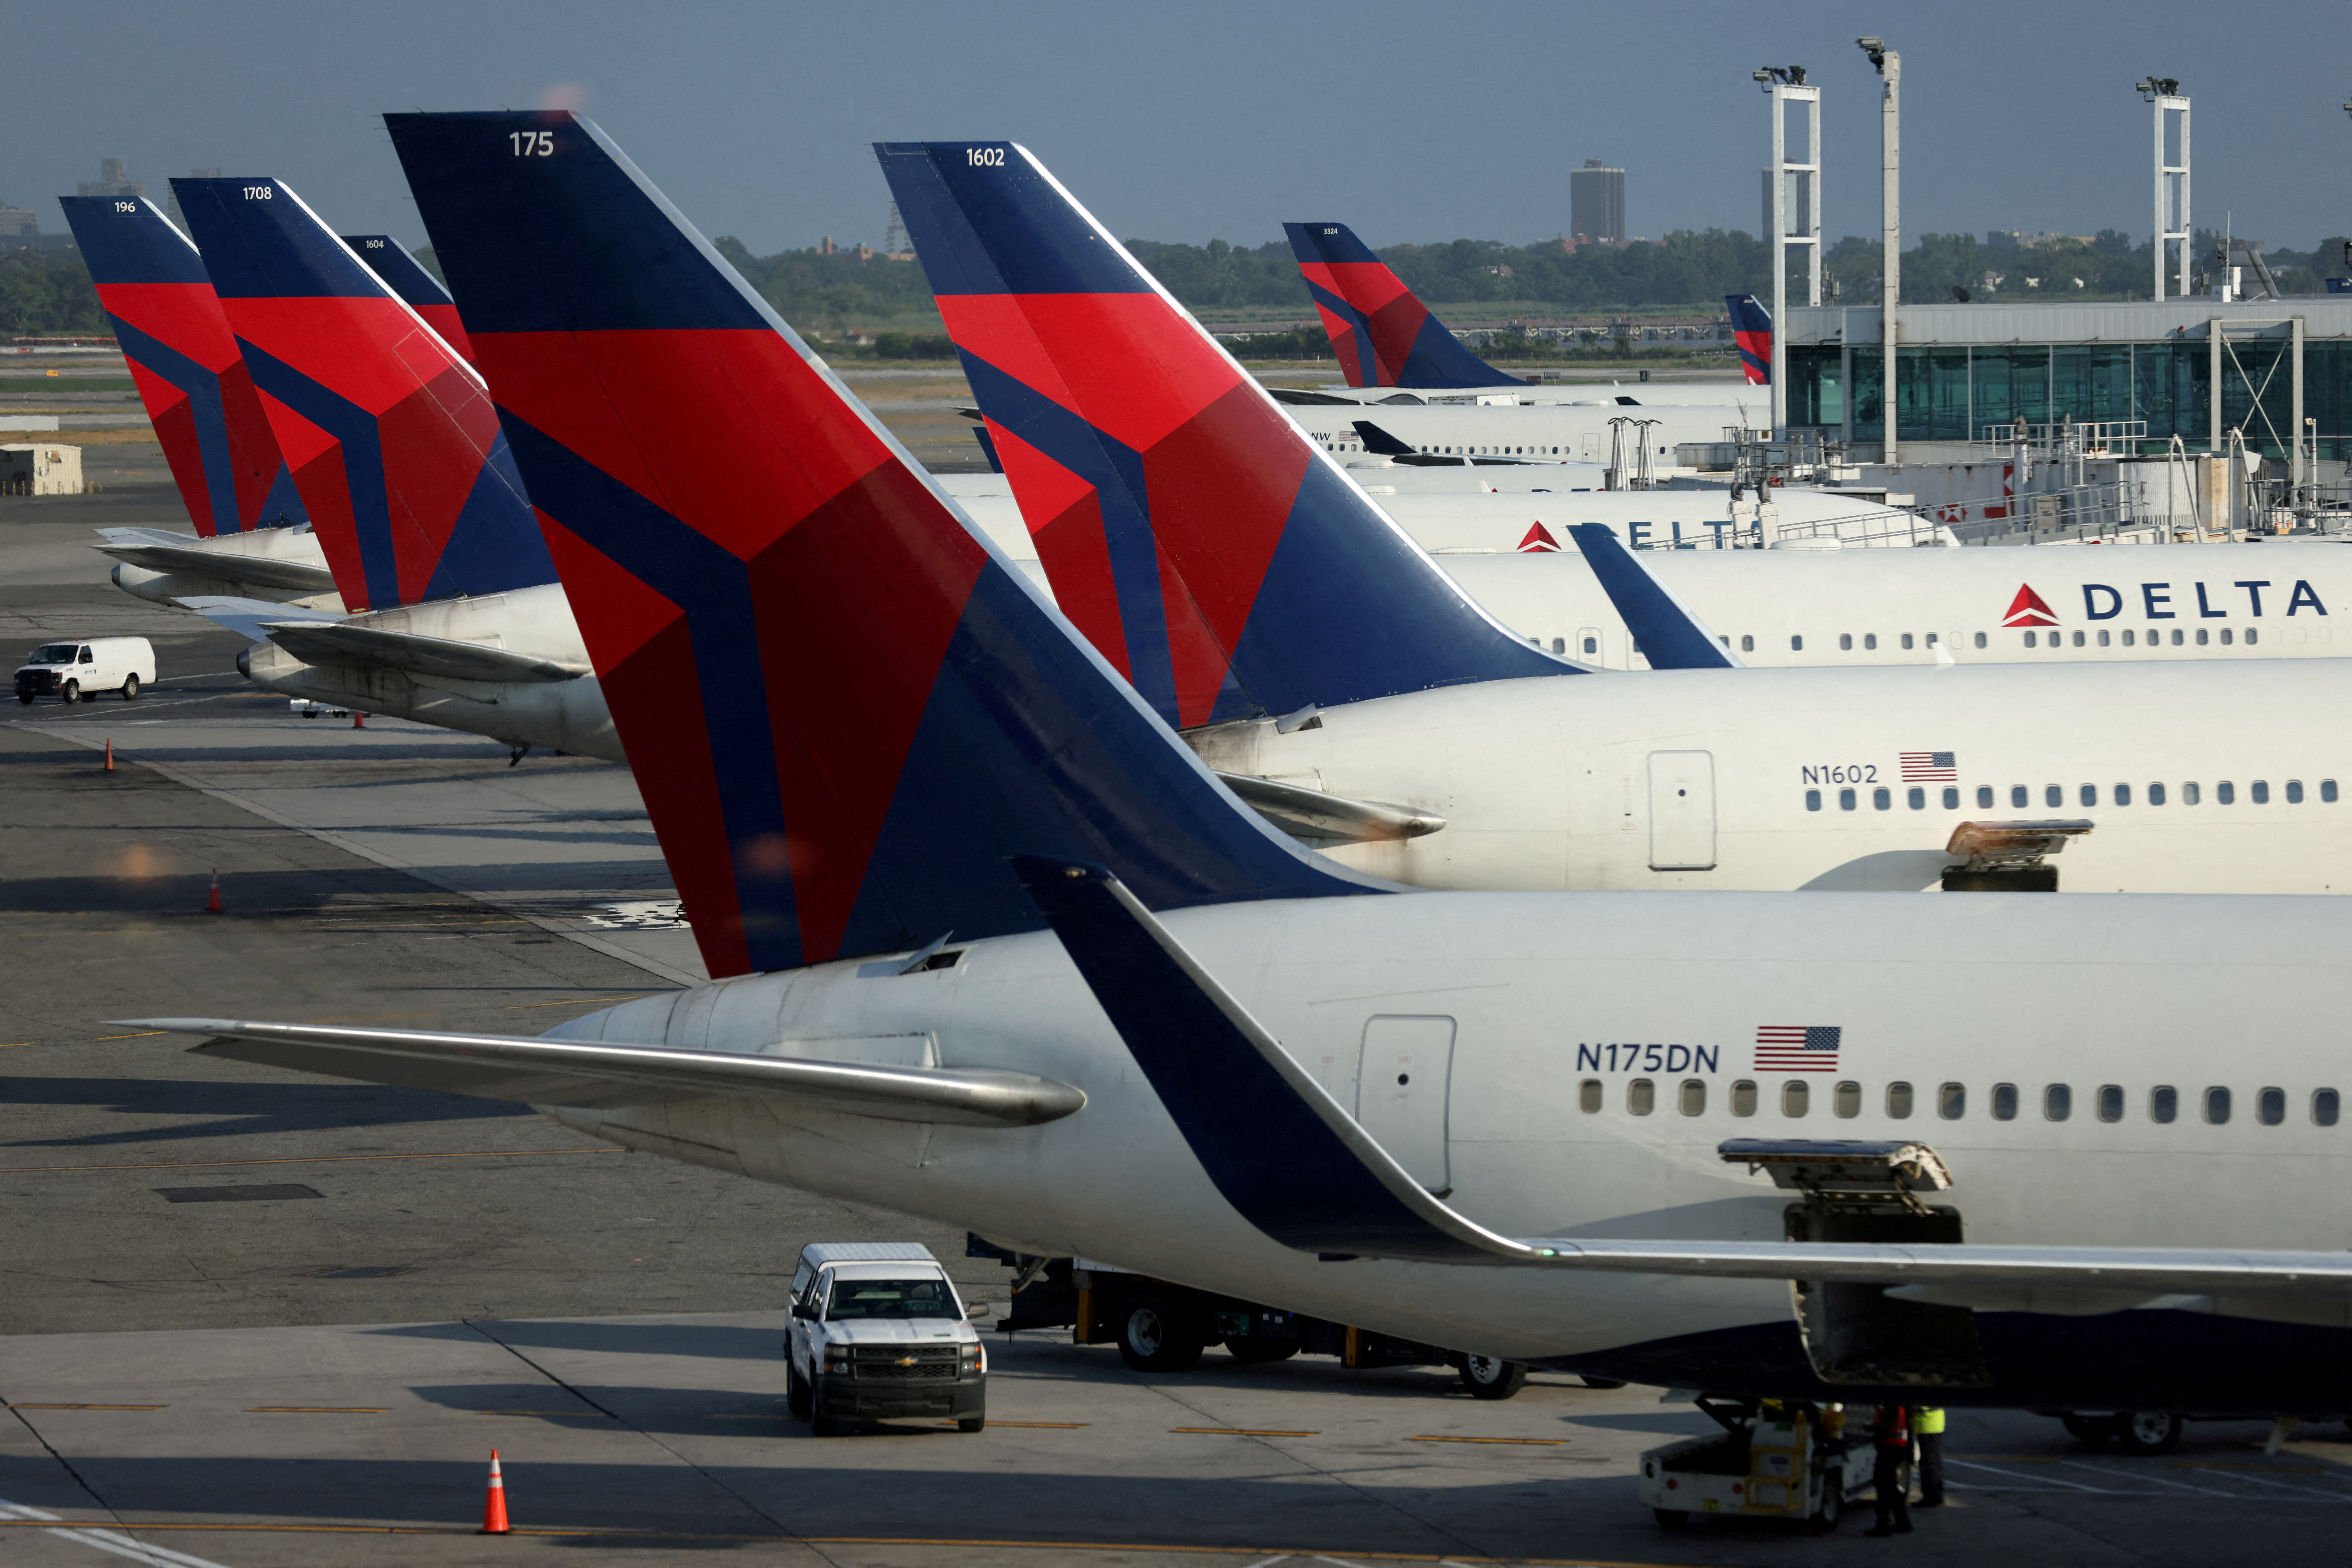 Delta Air Lines planes are seen at John F. Kennedy International Airport on the July 4th weekend in Queens, New York City